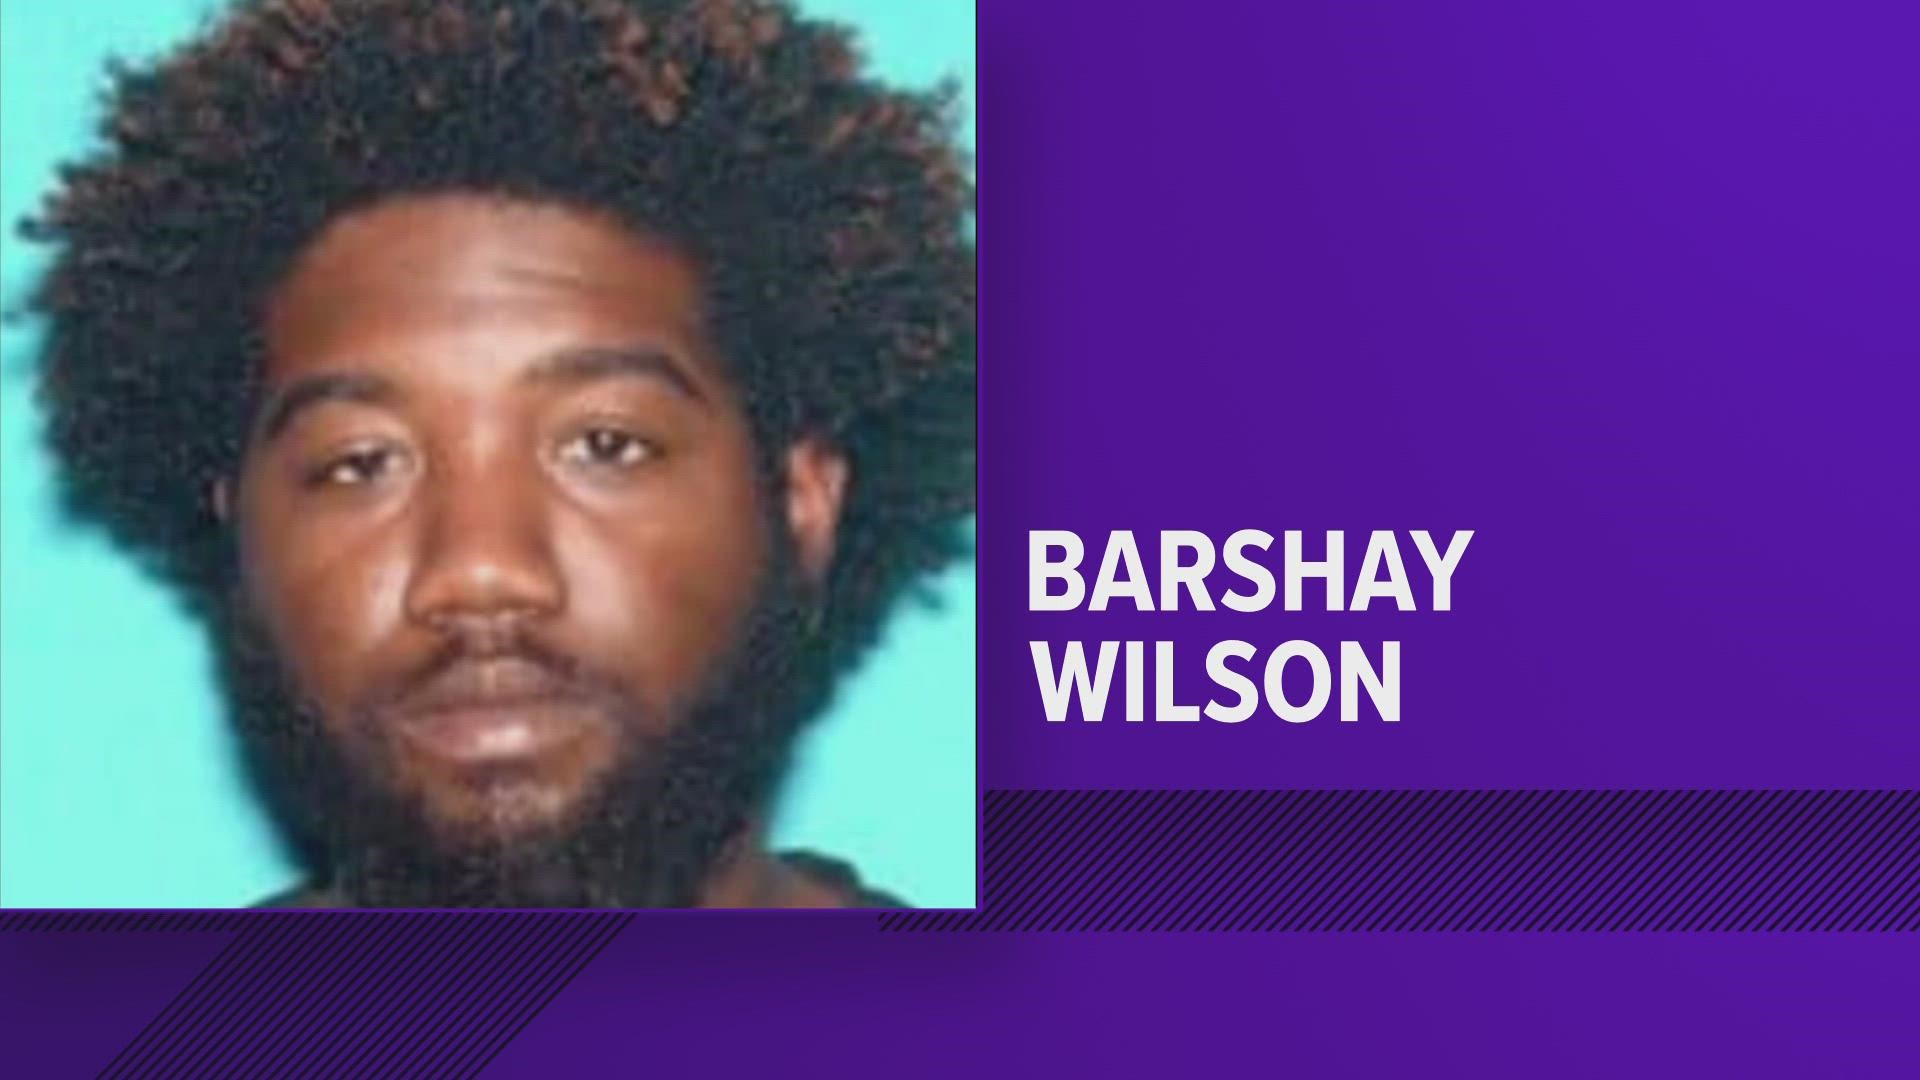 Investigators confirmed Wednesday, Dec. 14, a body found Monday was that of Barshay Wilson, 25, who they said was reported missing Dec. 9, 2022.